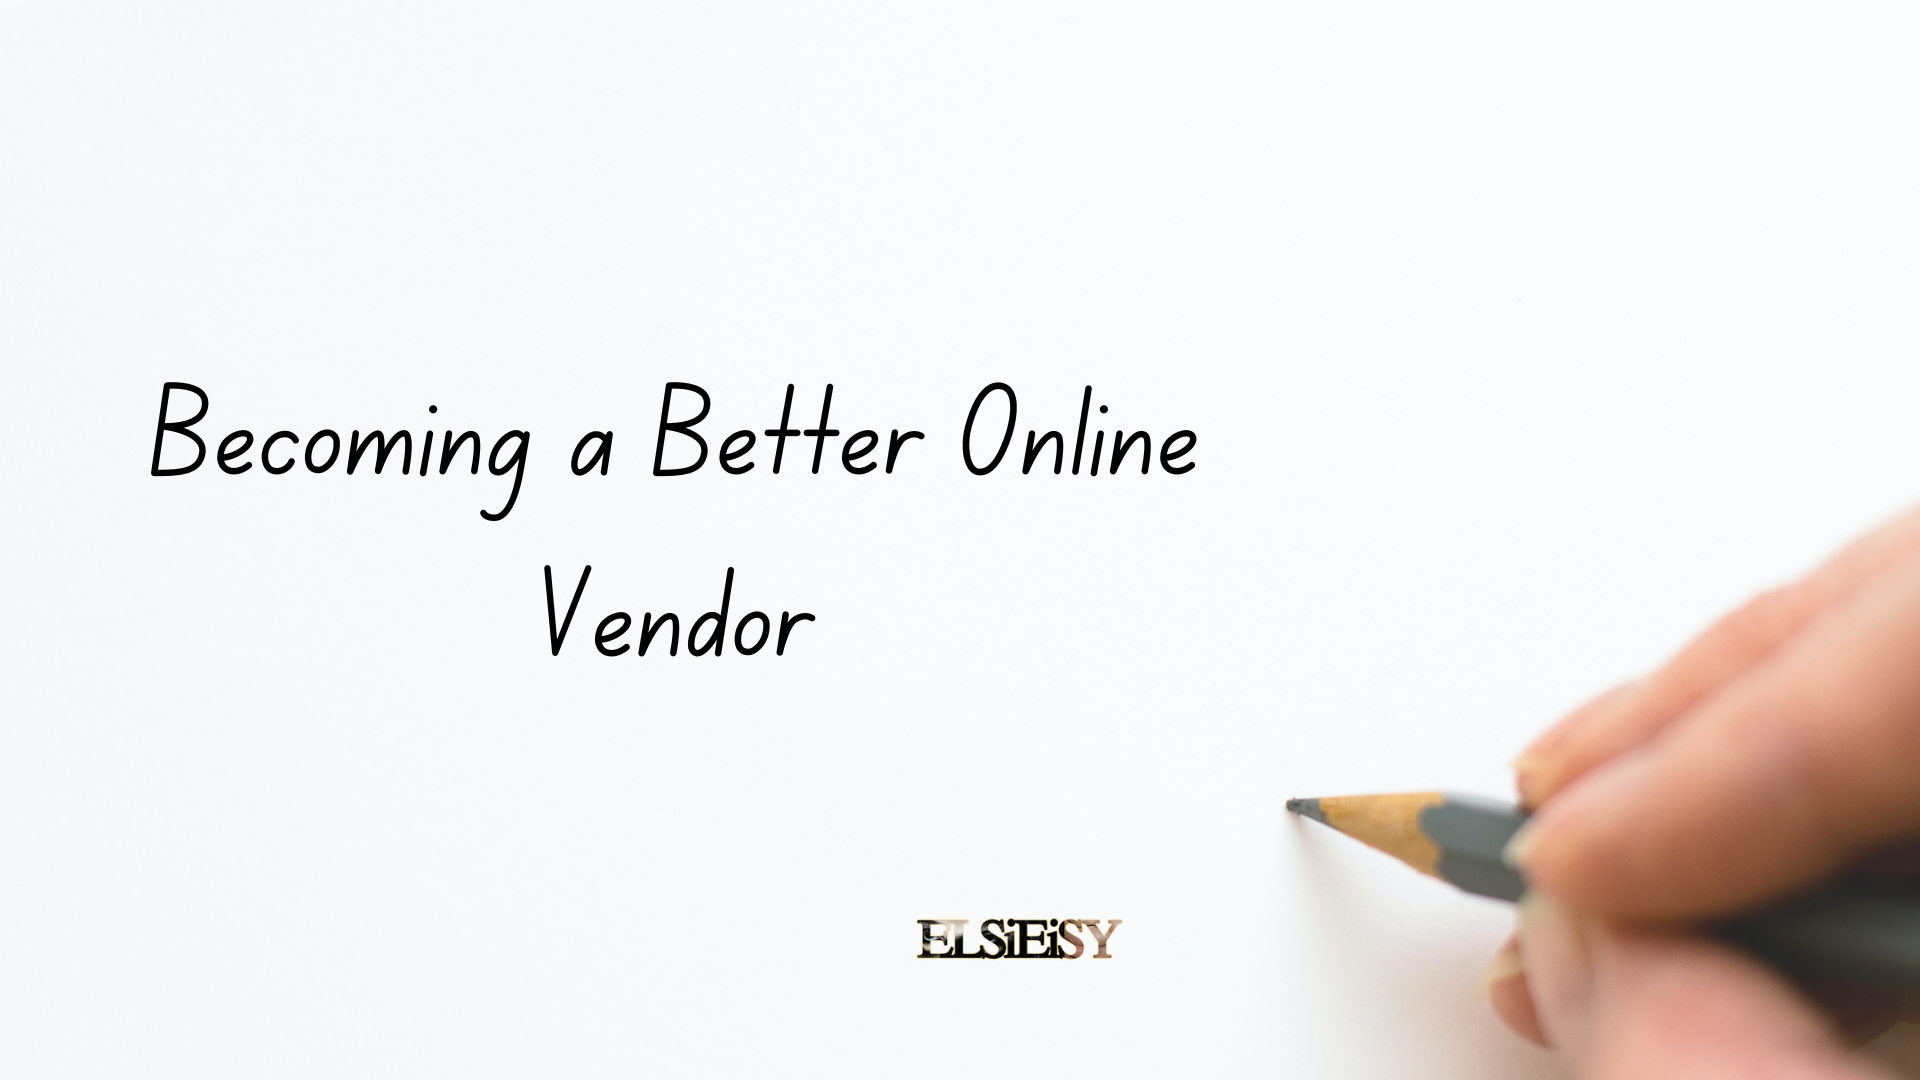 Small Business: Becoming a Better Online Vendor